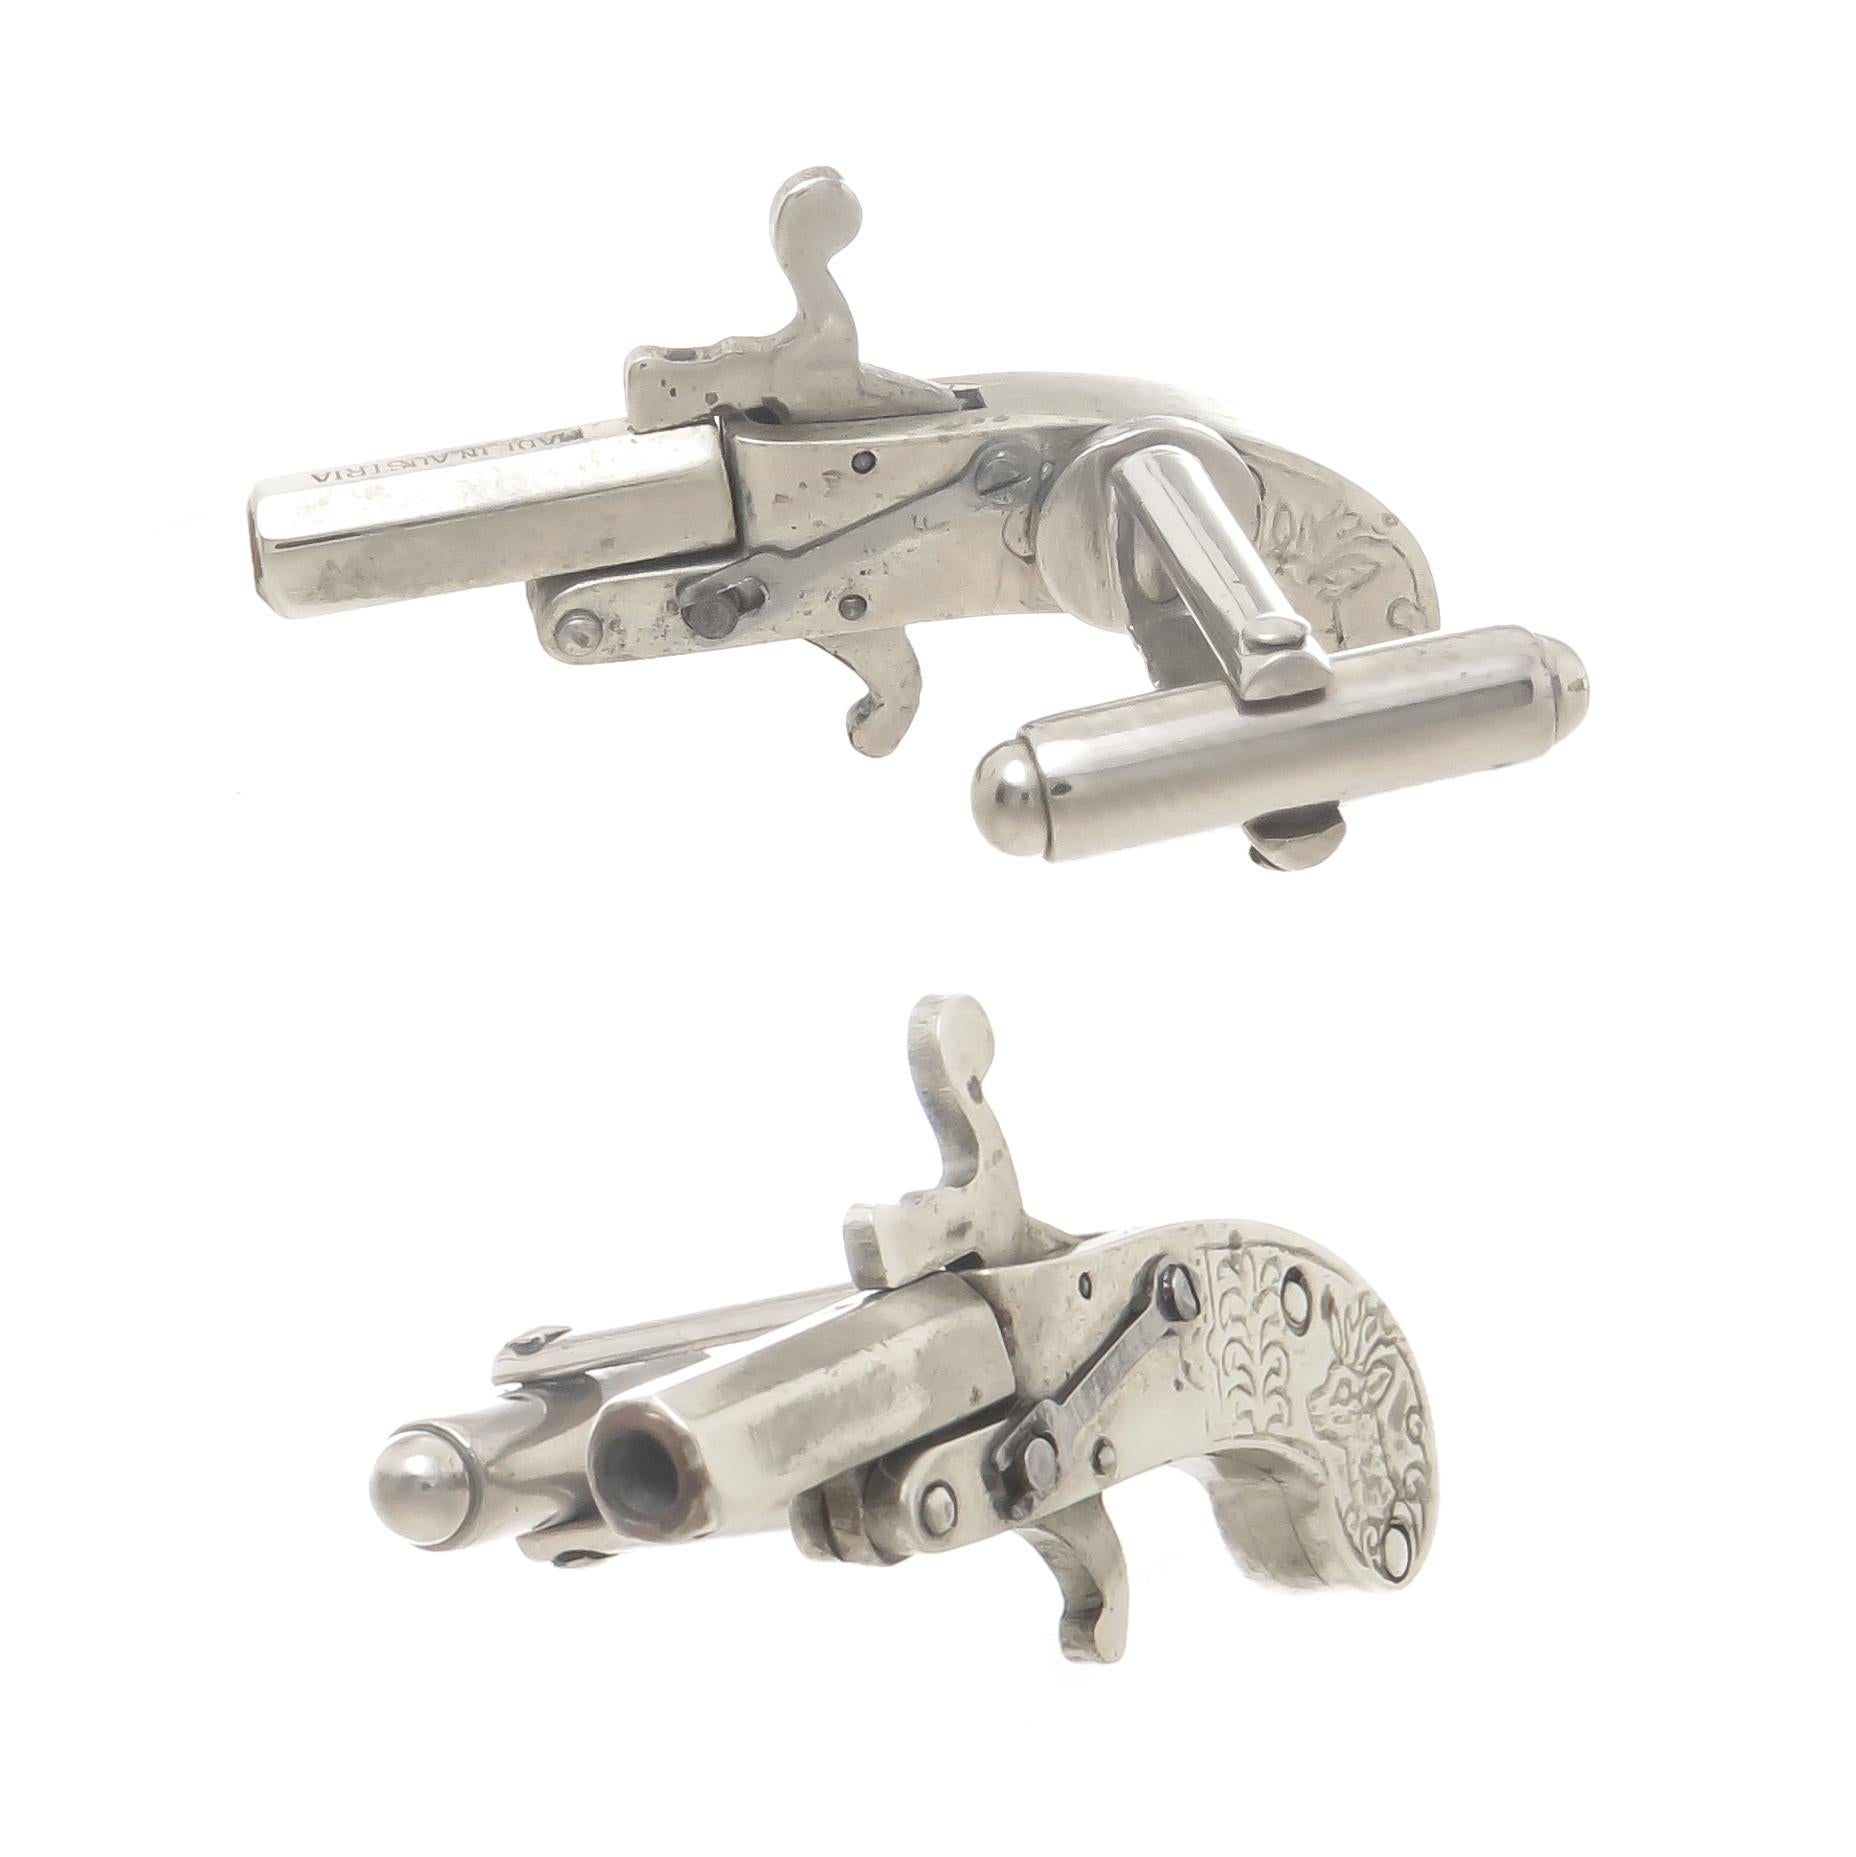 Circa 1930s Austrian Miniature Pistol Cufflinks, Nickle metal, measuring 1 1/2 inch in length, all mechanics on these are fully functional as these originally fired a cap.
